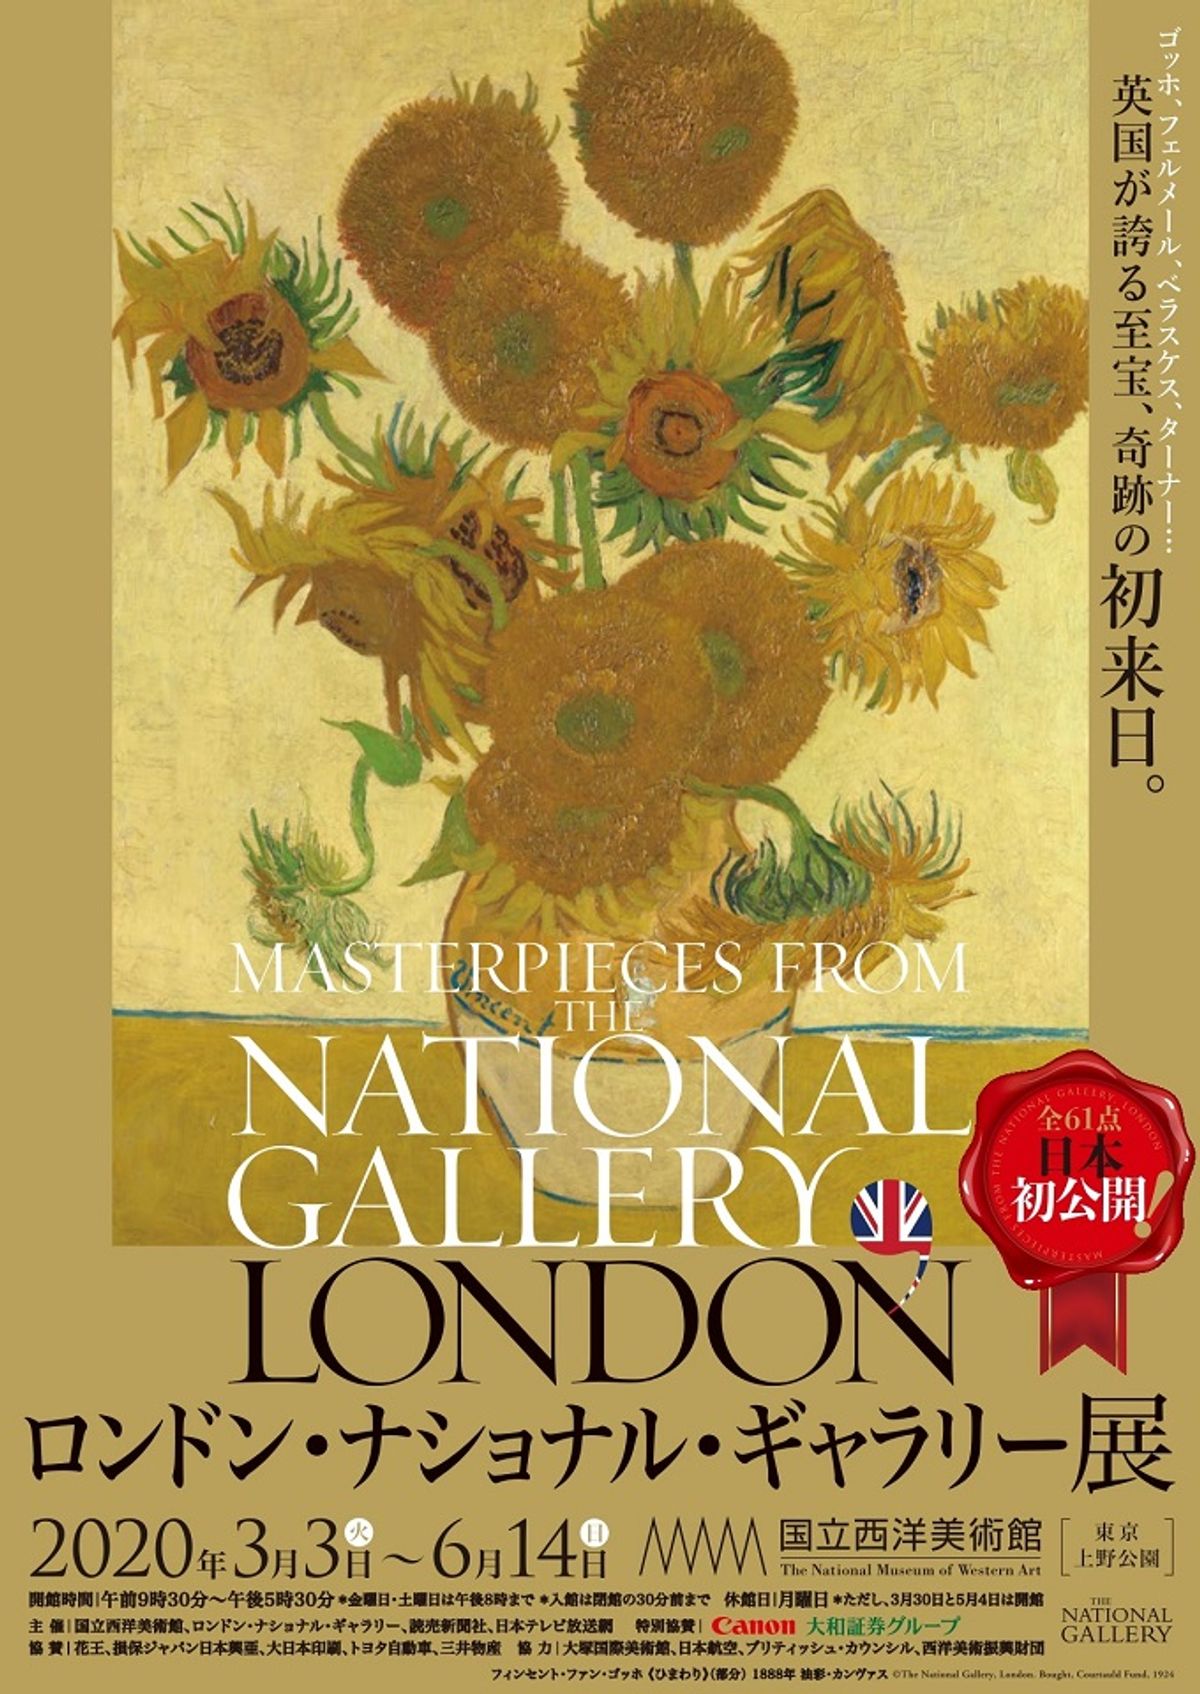 Advertising poster for Masterpieces from the National Gallery, London at Tokyo’s National Museum of Western Art, 2020 